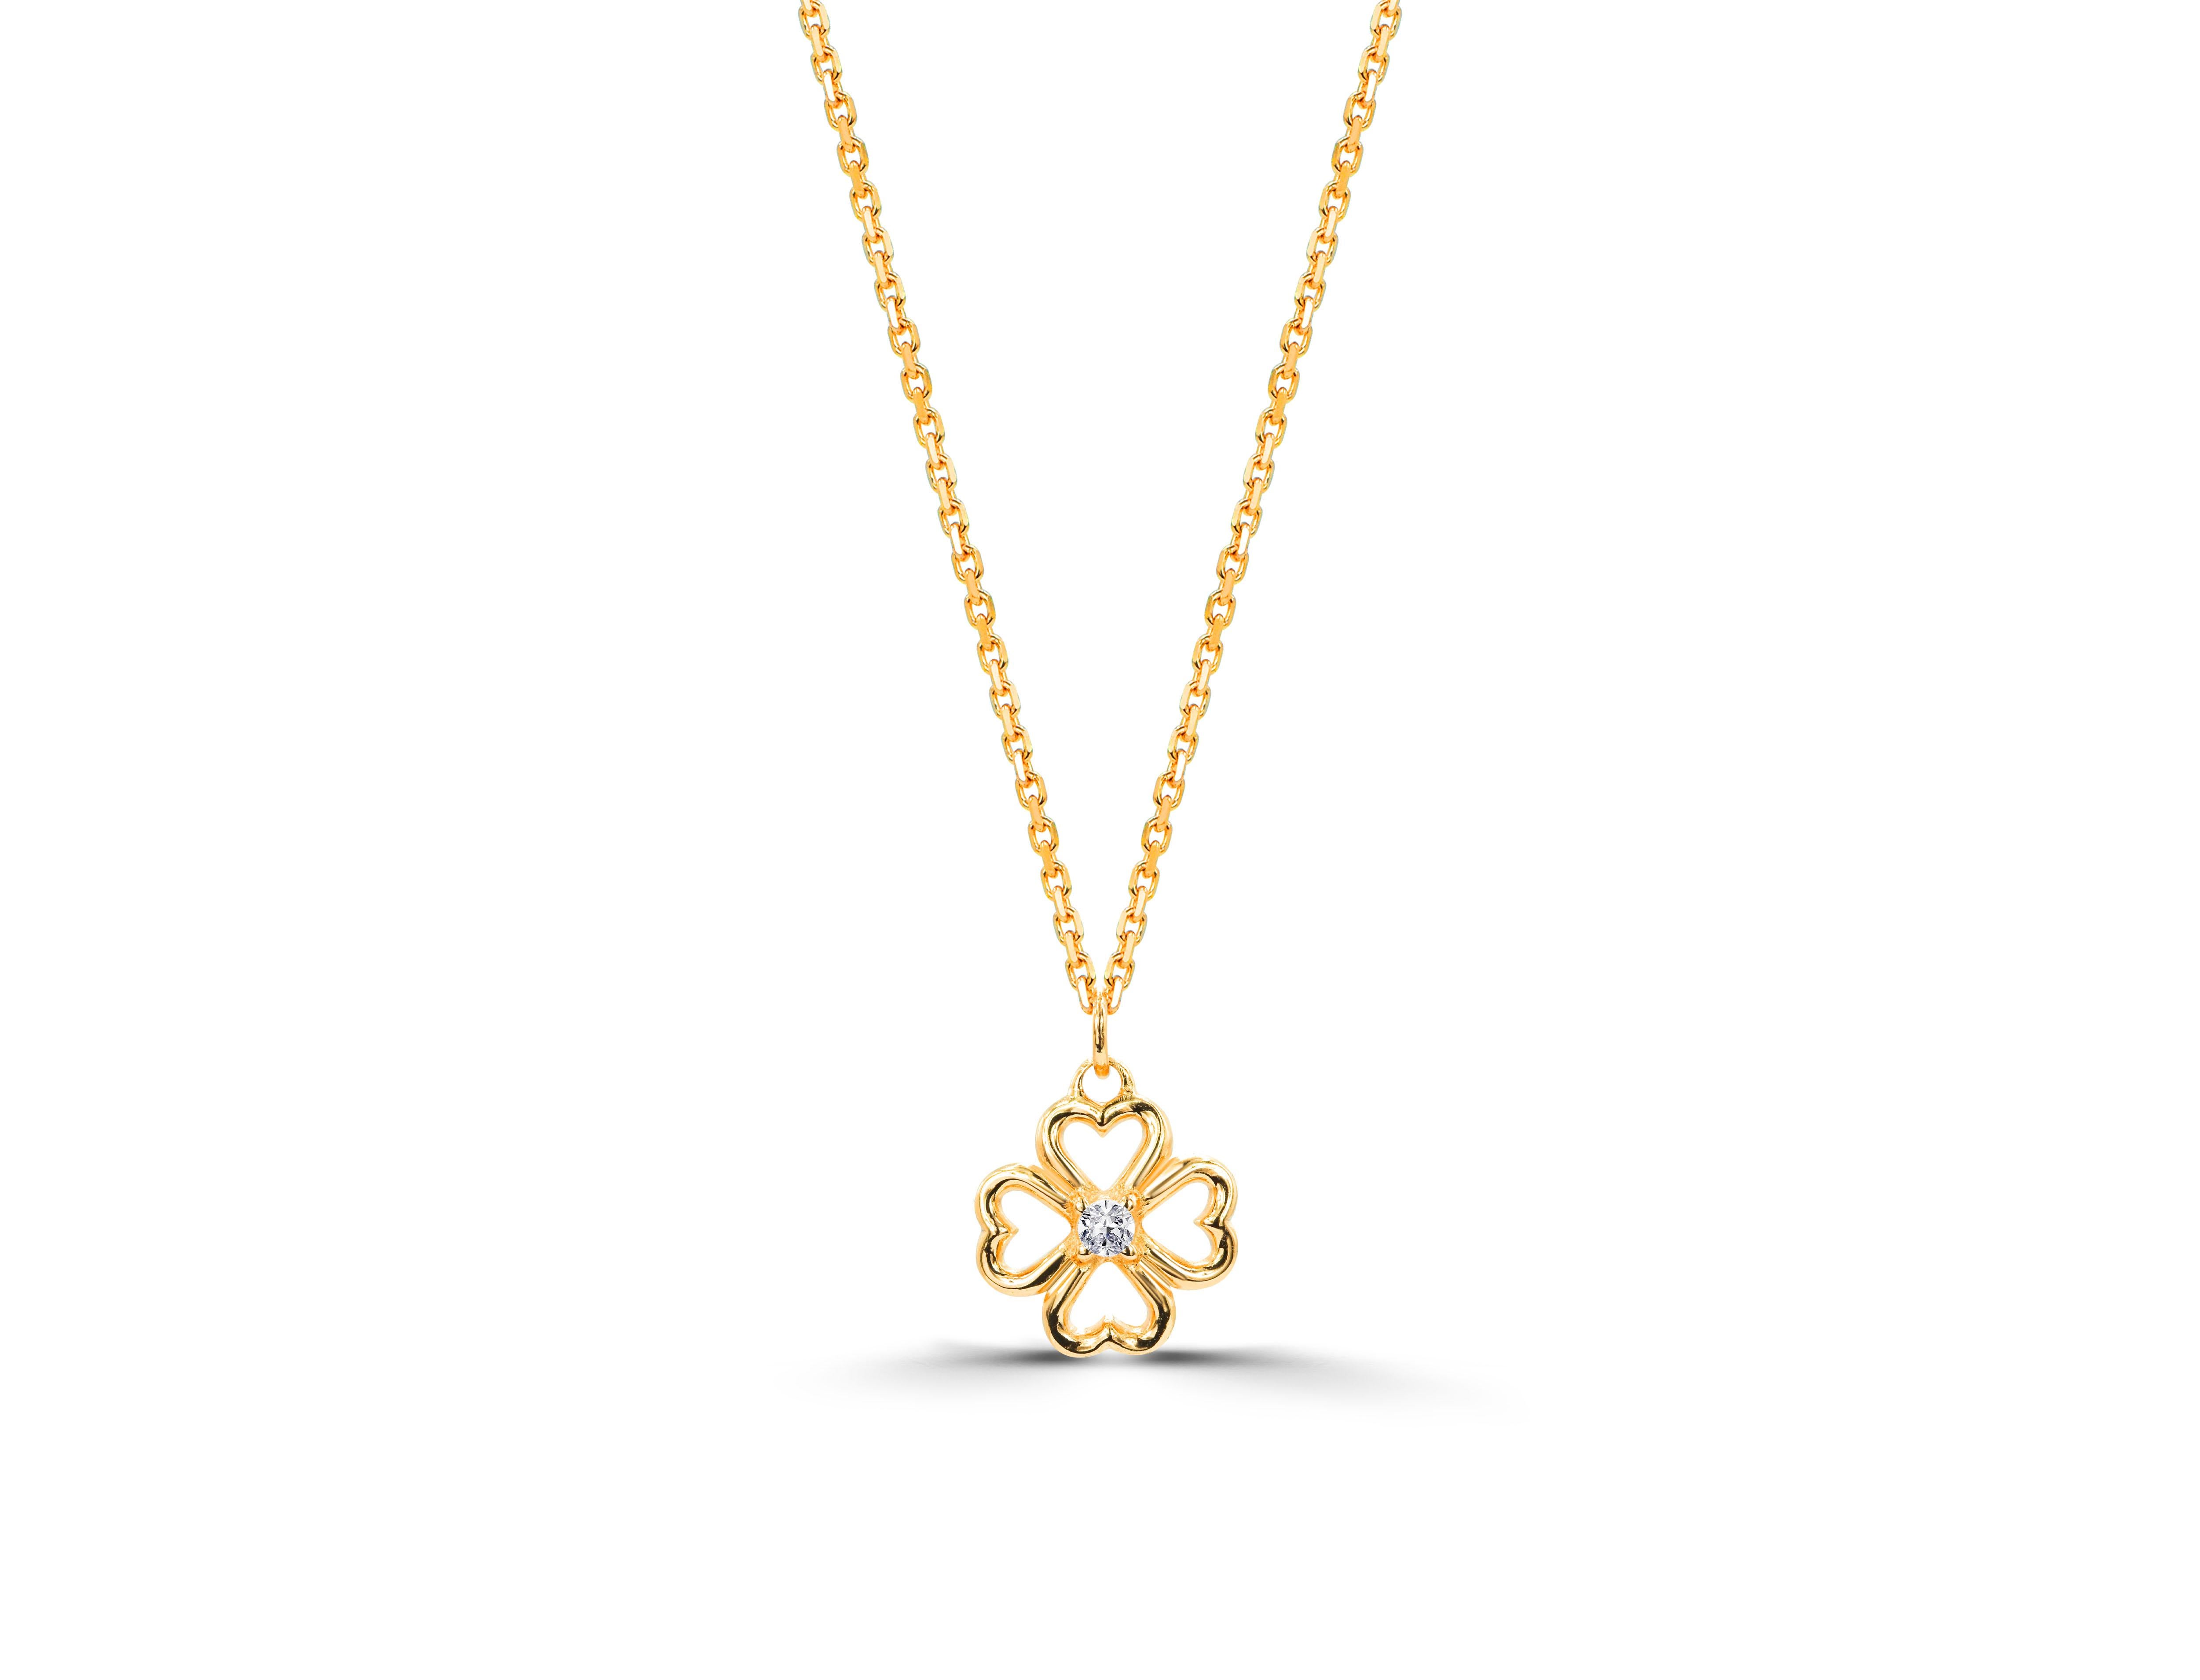 Minimalist diamond clover necklace/ Lucky clover necklace/ Diamond flower / Gold necklace/  Wedding necklace/  Gifts for her

Clover necklace, flower necklace, Handmade jewelry, Bridesmaid gifts, Diamond necklace, Christmas gift, gifts for women,